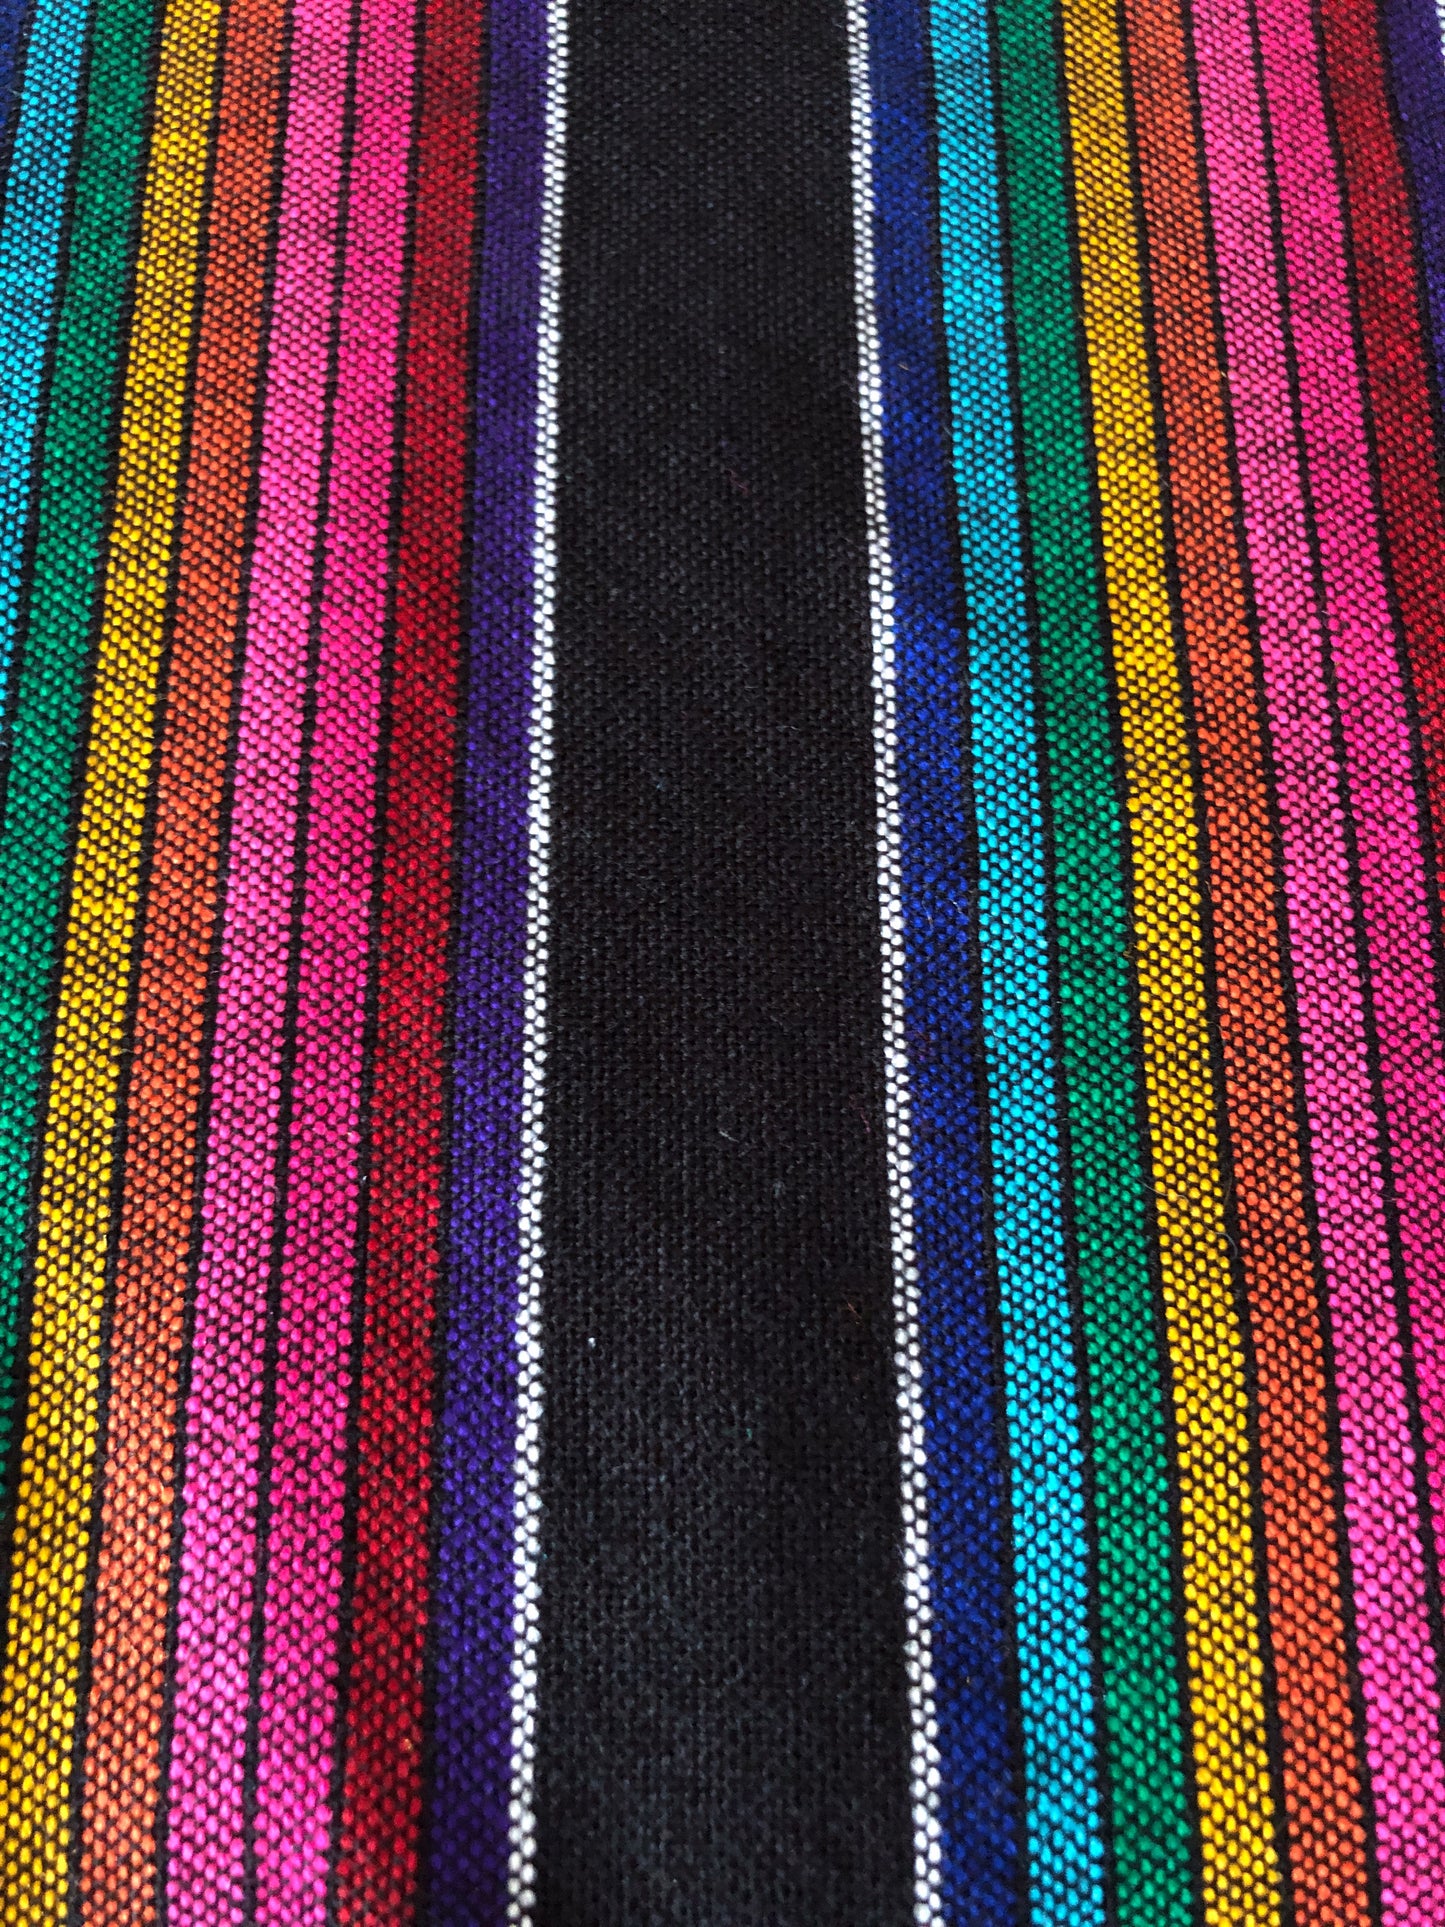 Mexican striped Table Runner - wide stripe